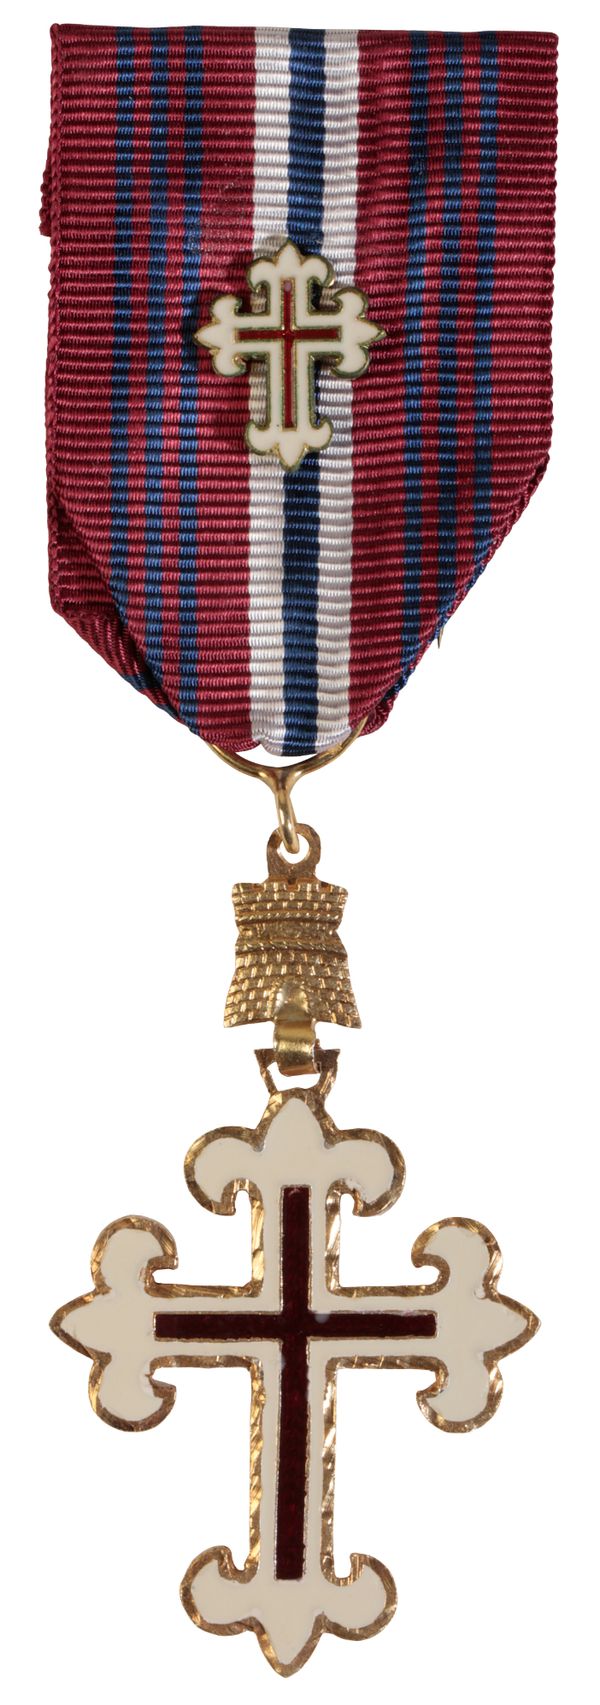 PORTUGAL. MEDAL FOR MILITARY MERIT, III CLASS